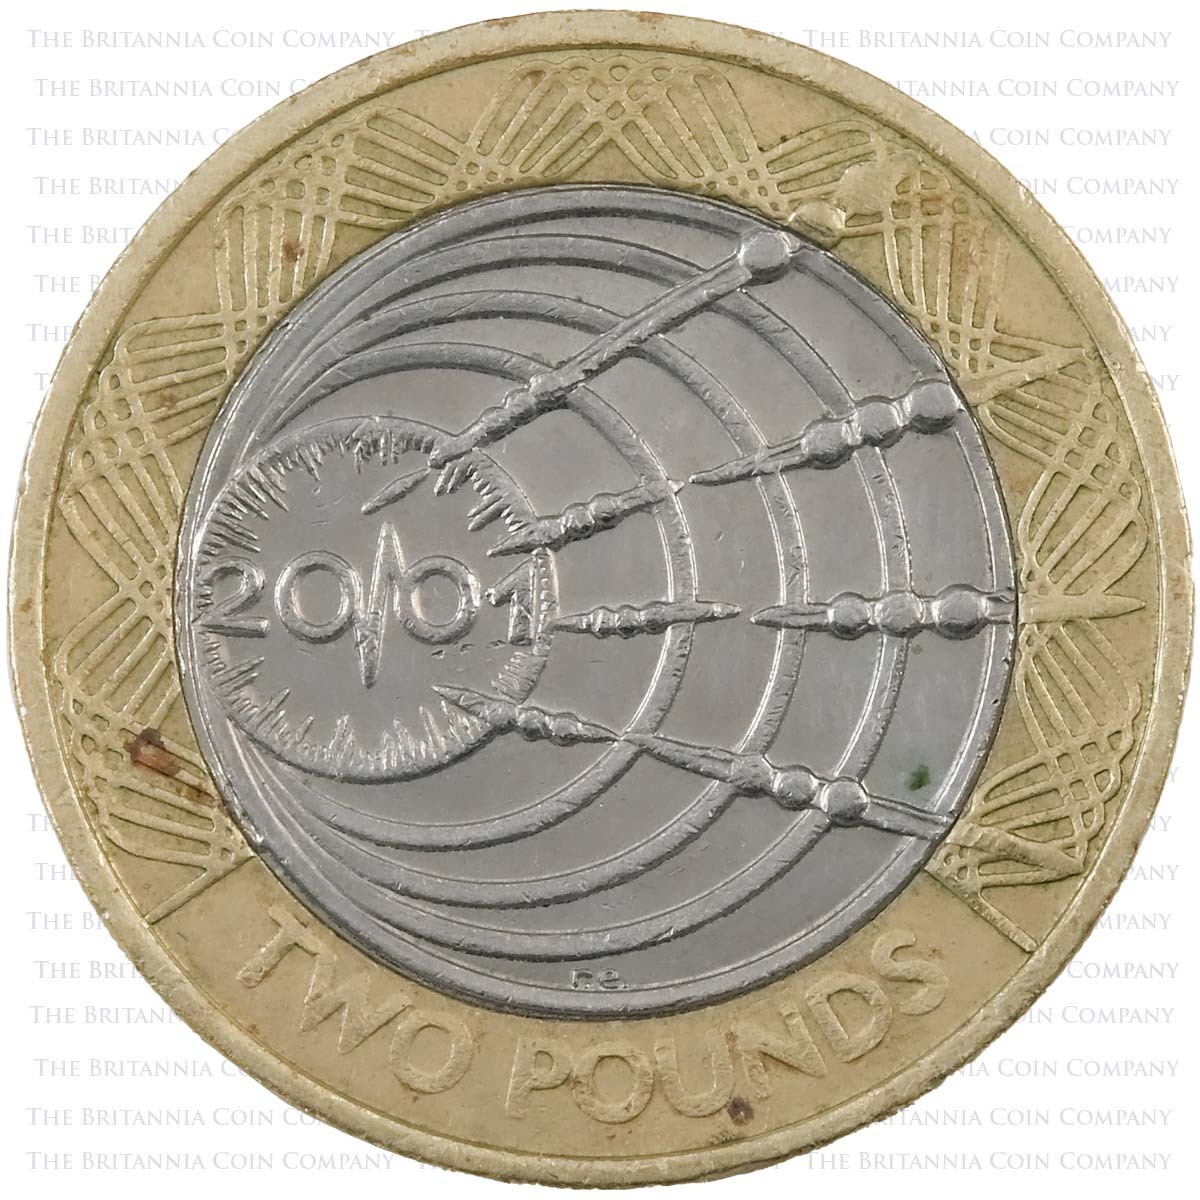 2001 Marconi First Wireless Transmission Circulated Two Pound Coin Reverse